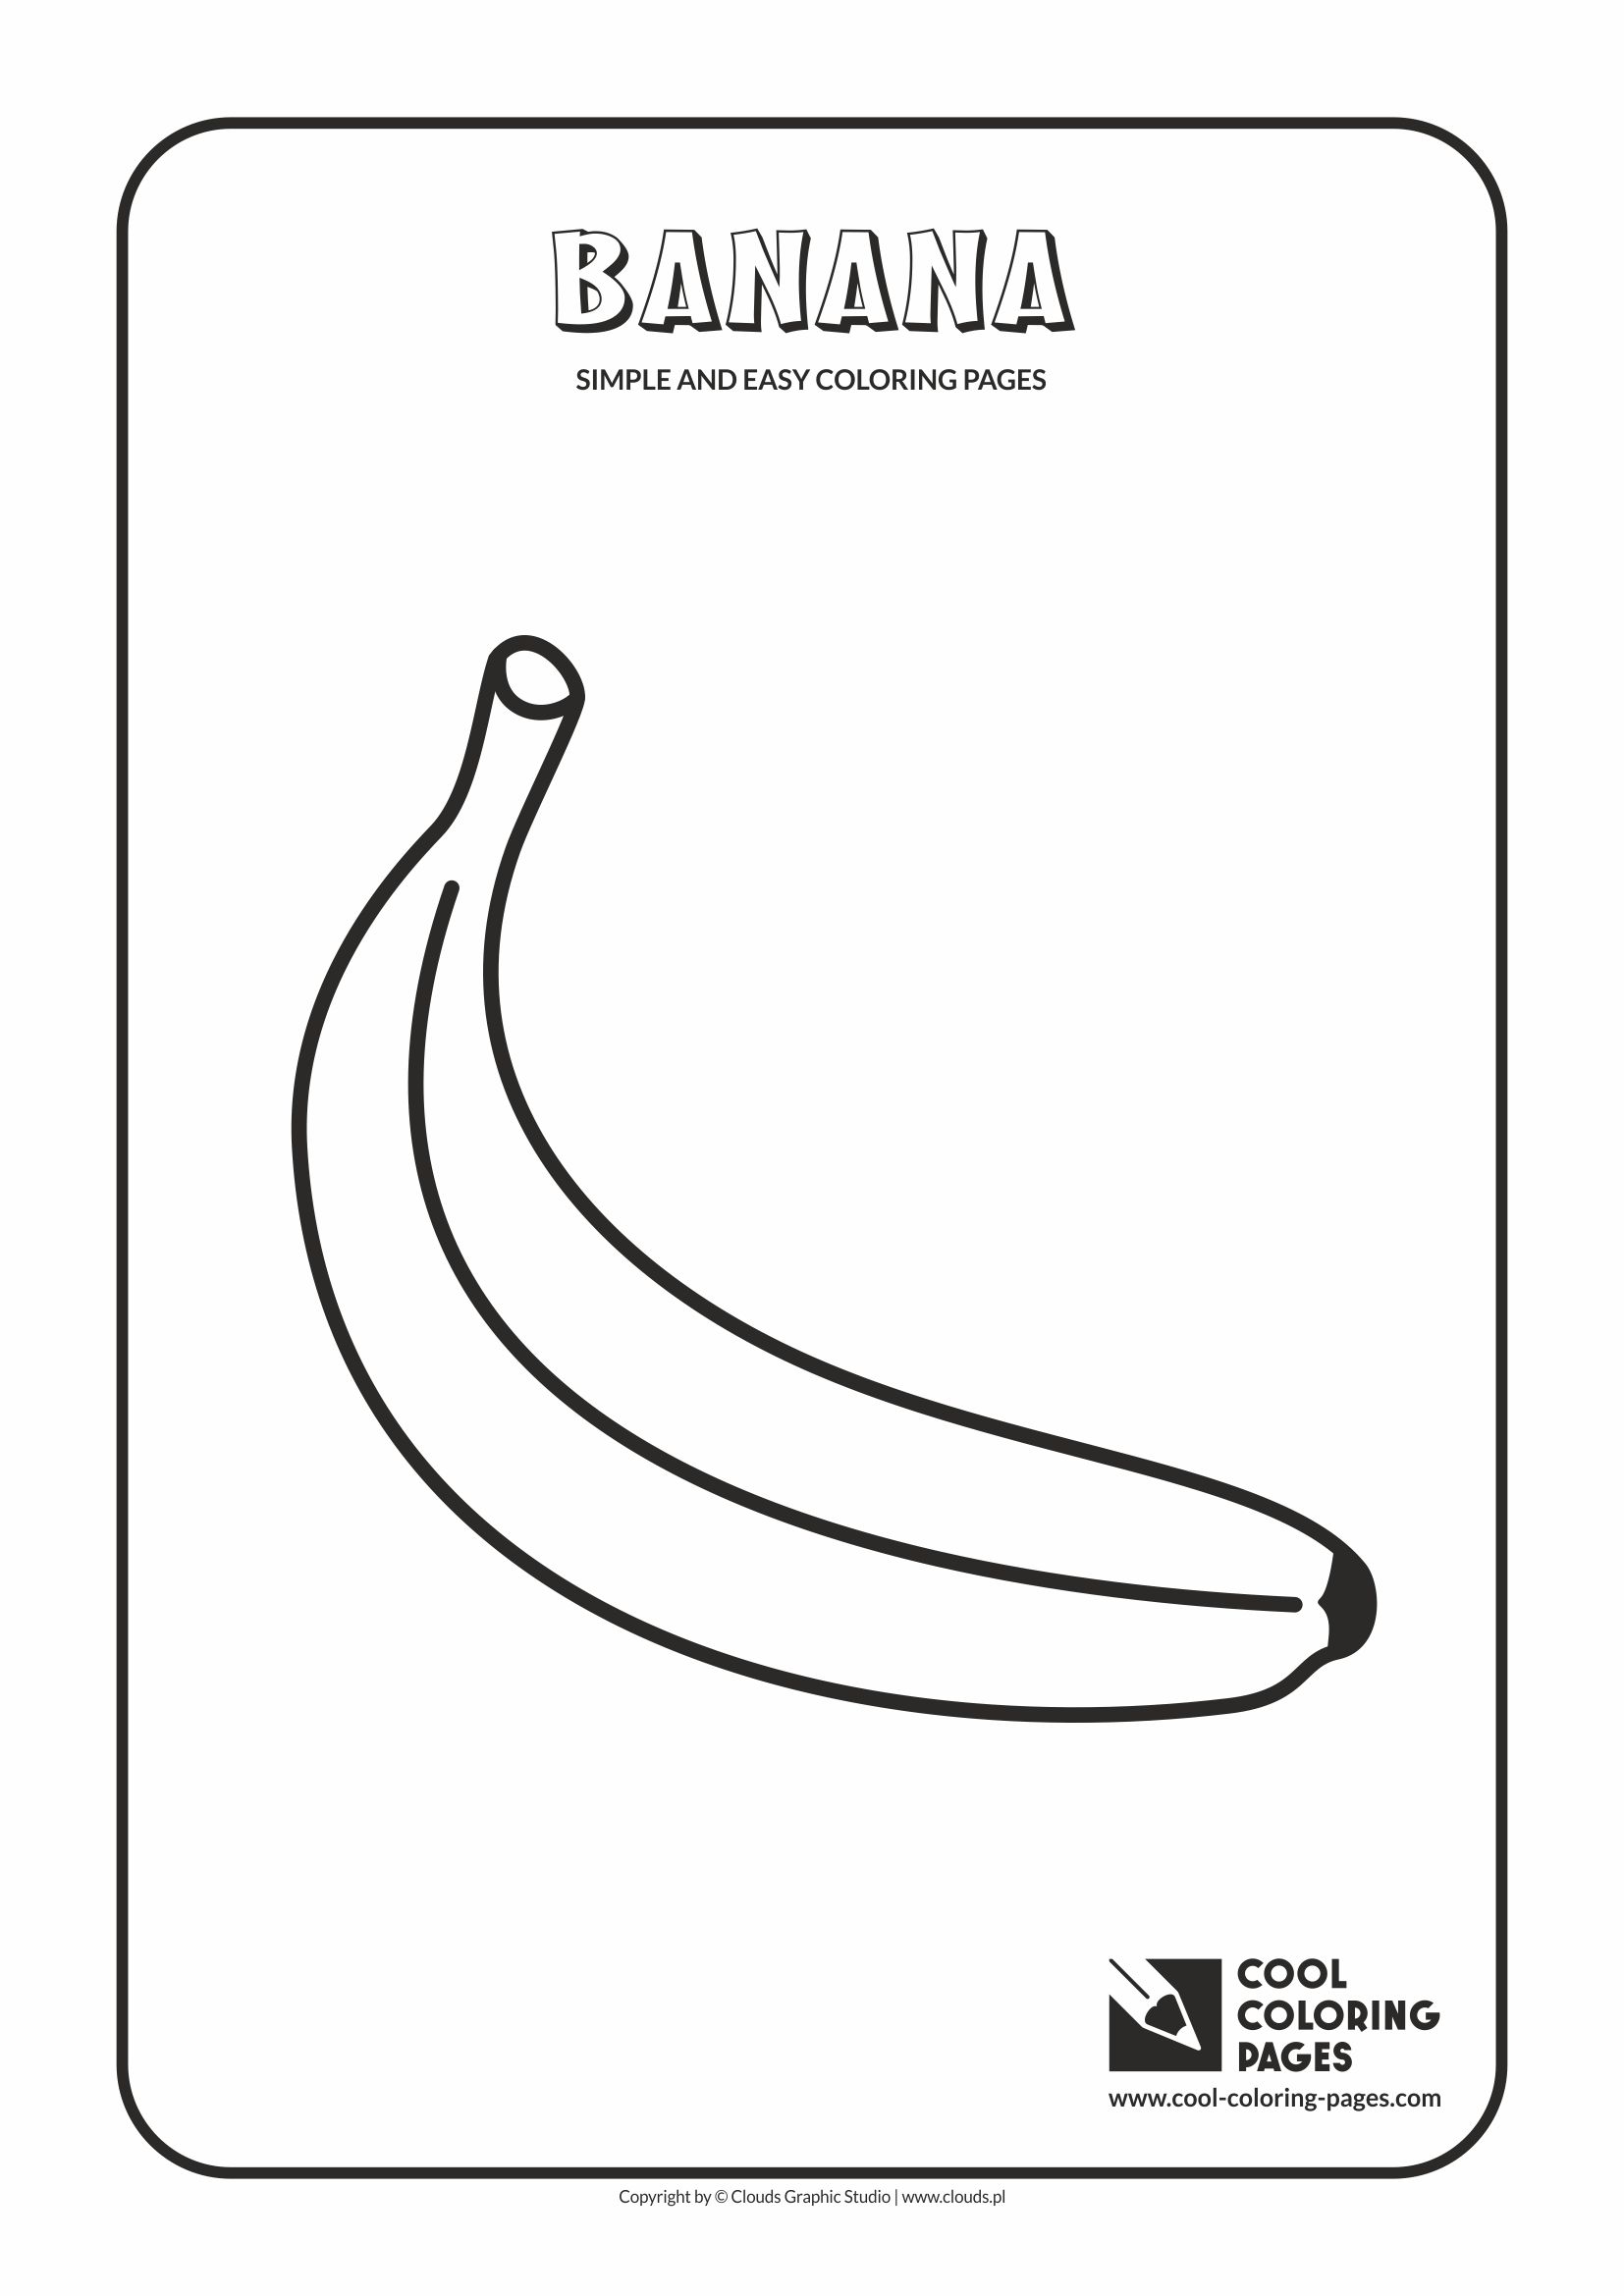 Simple and easy coloring pages for toddlers - Banana